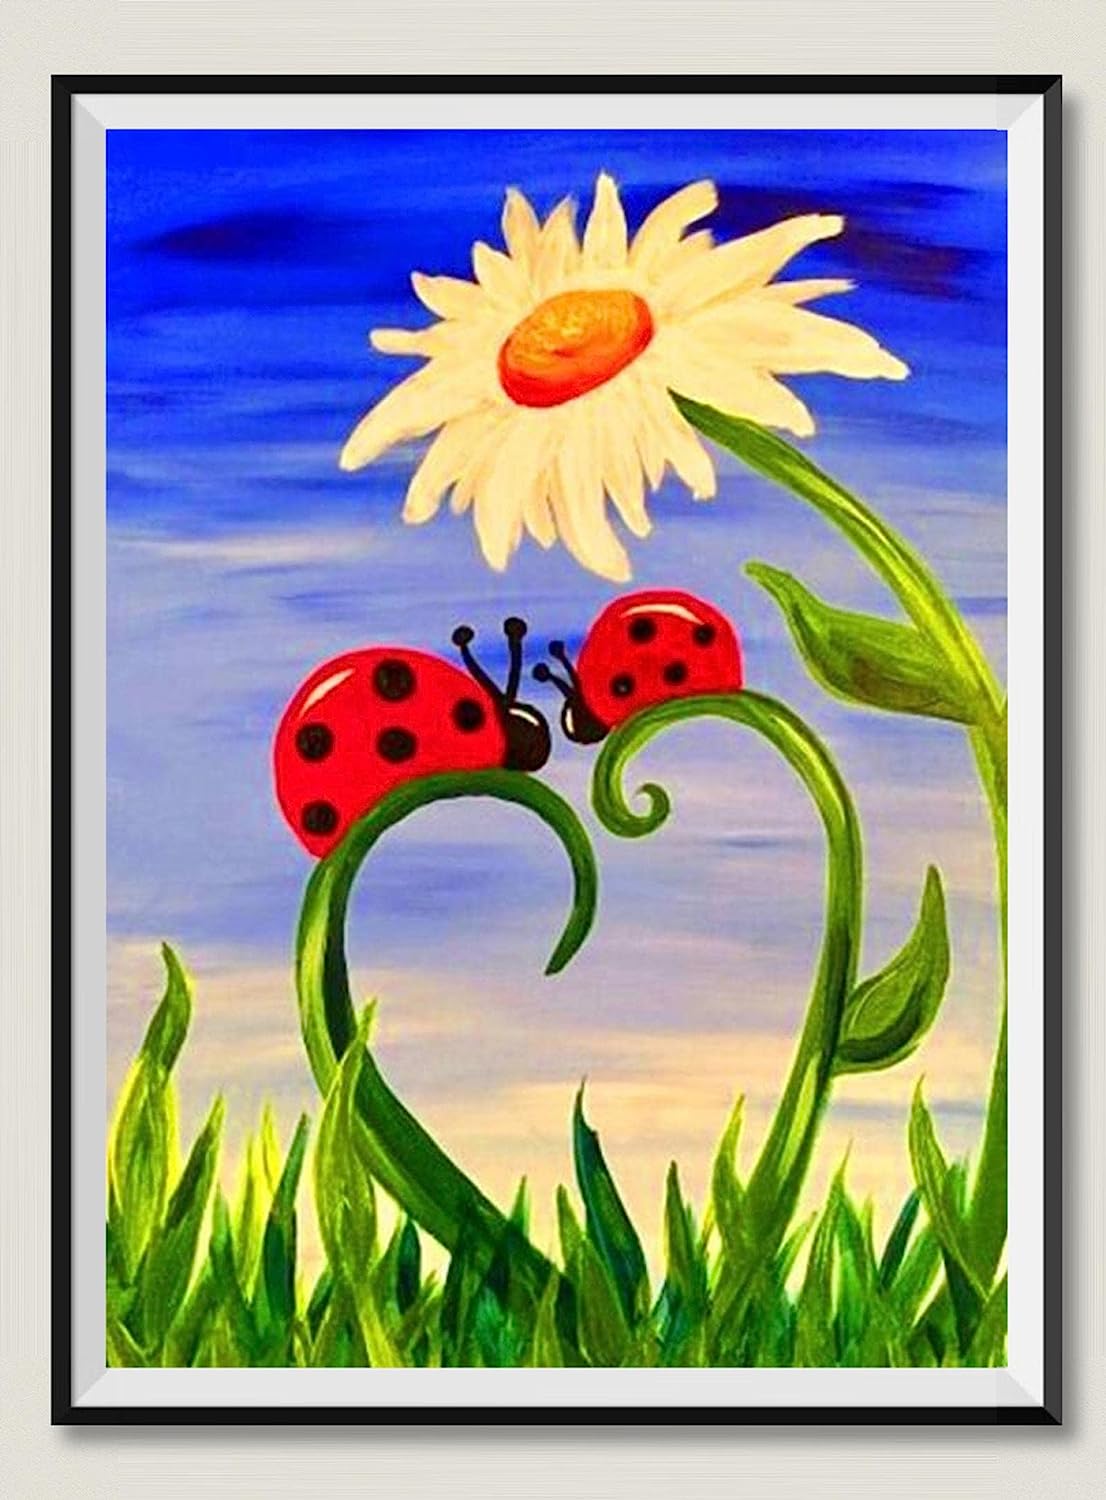 Ladybug in Love Under The Daisy - 1000 Piece Wooden Puzzle - Art Jigsaw Family Game Puzzle for Adults